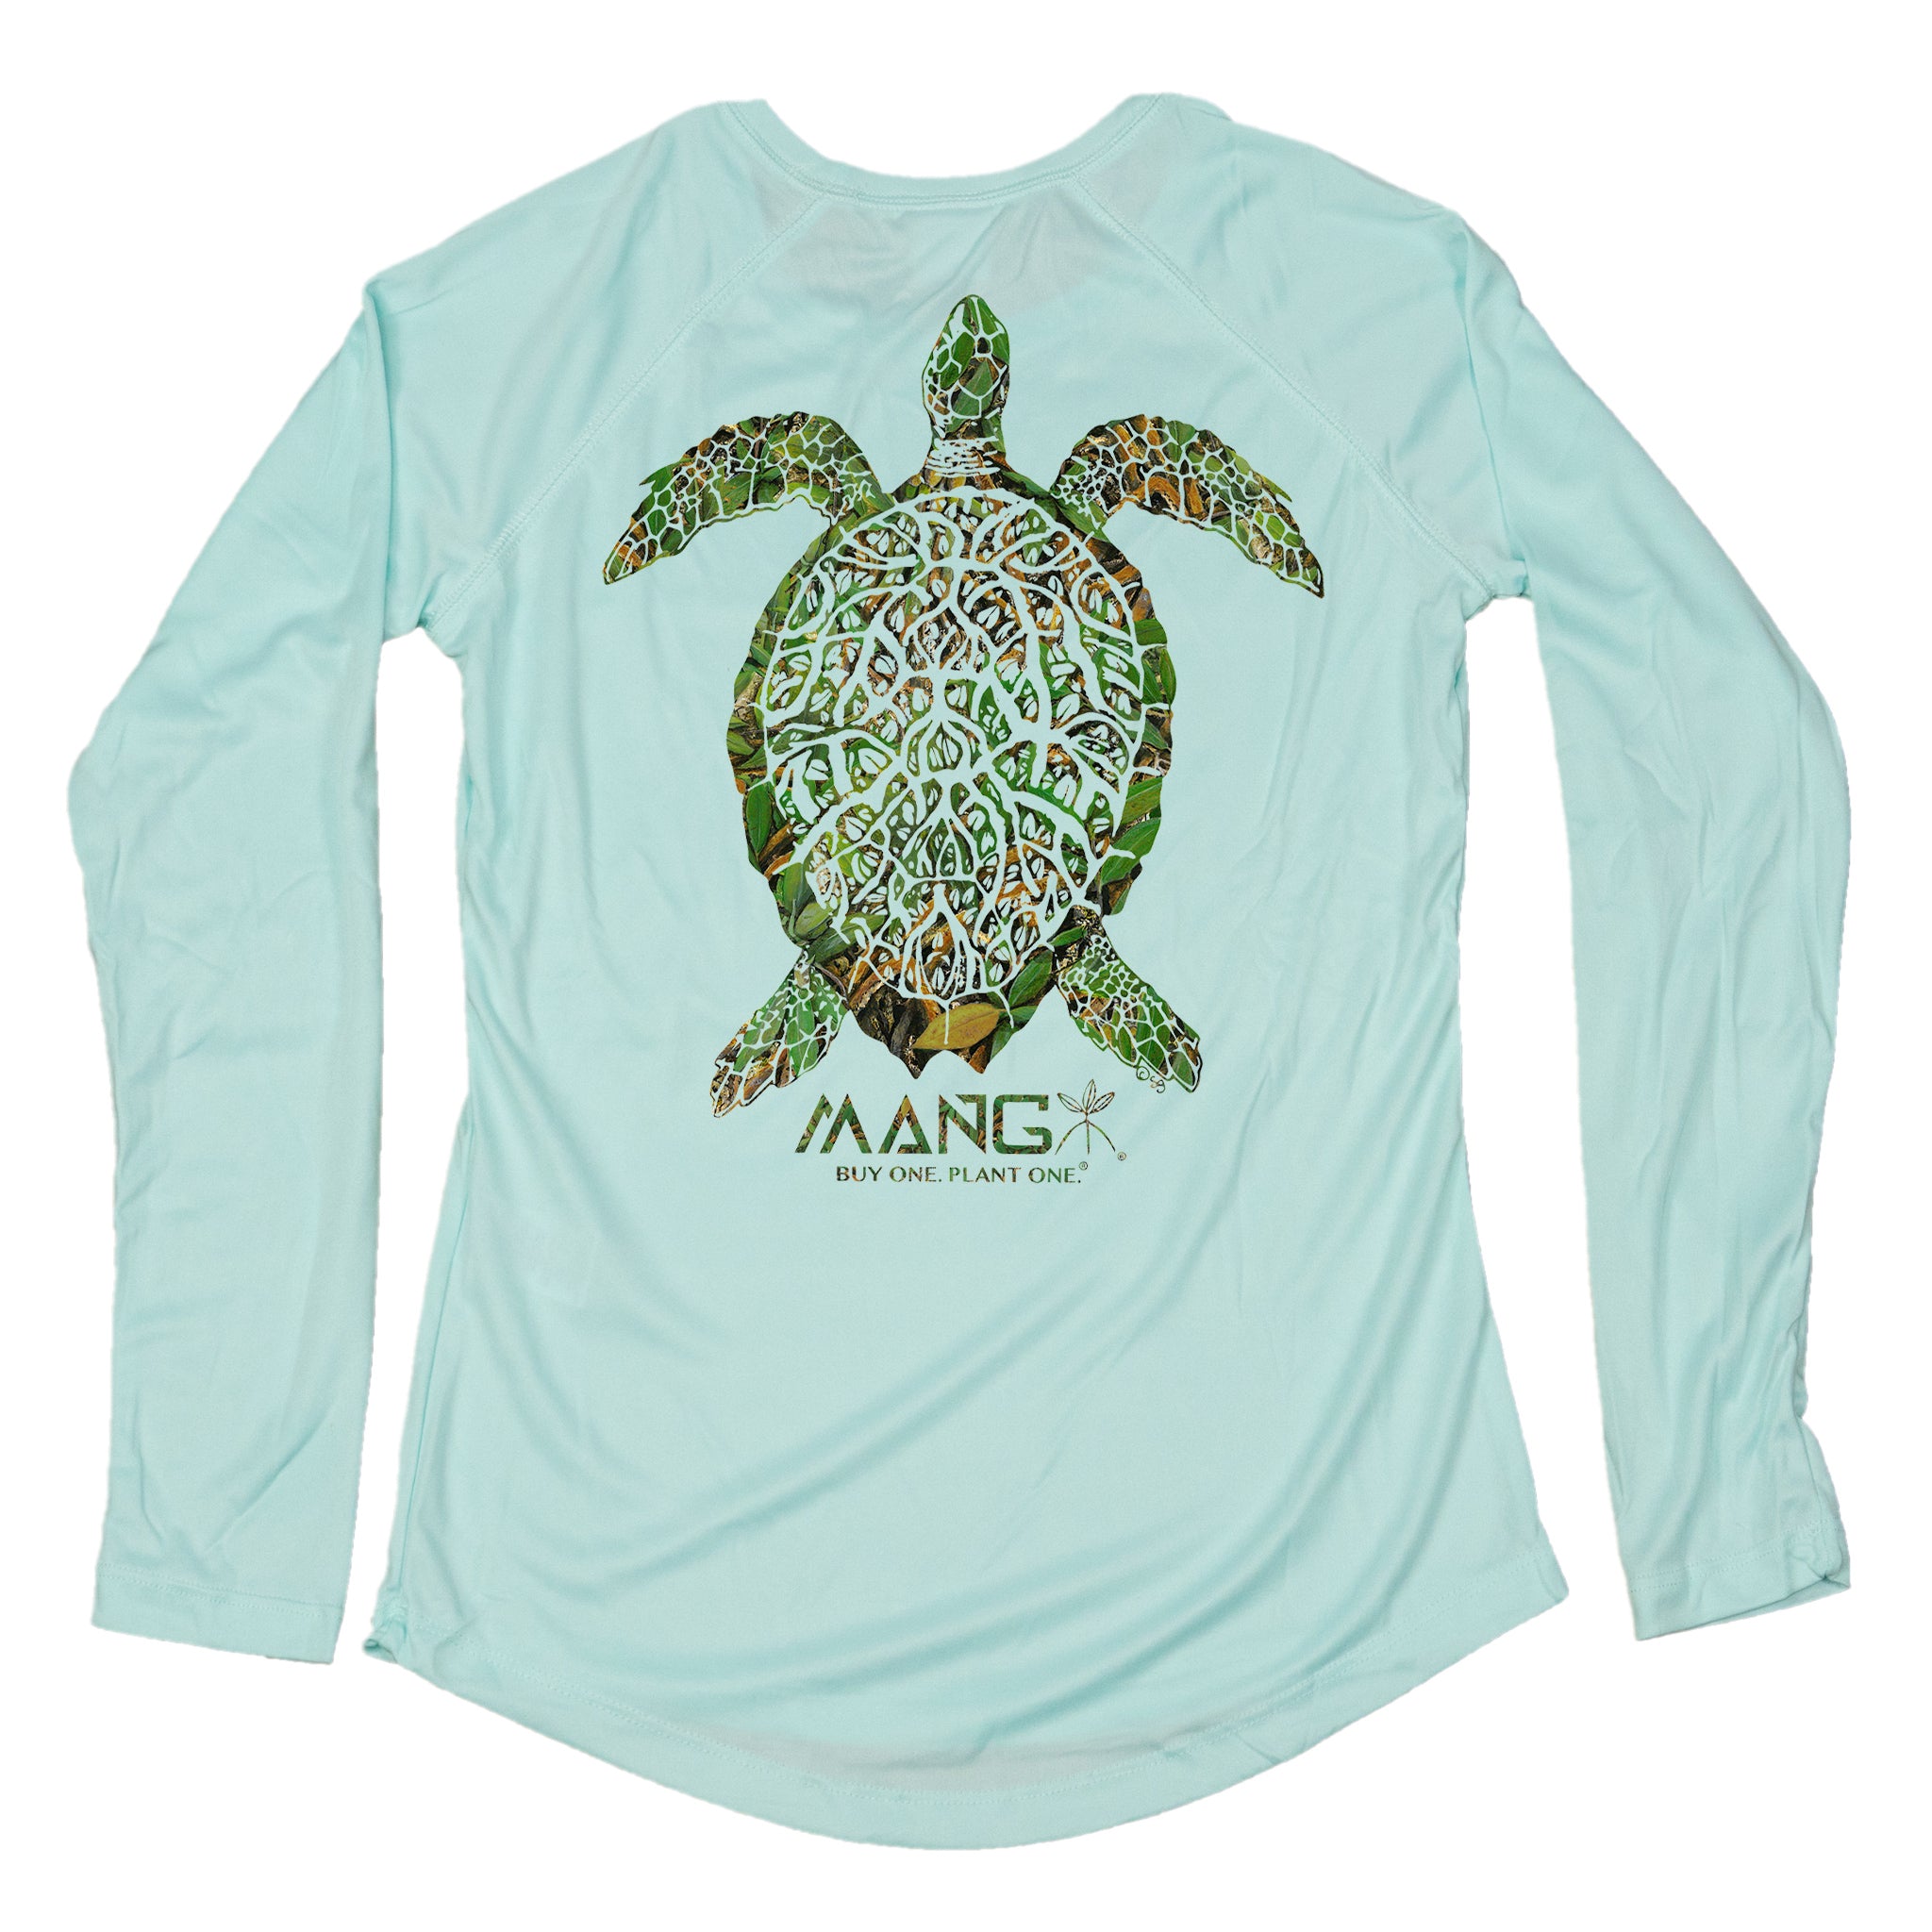 MANG Grassy Turtle - Women's - LS - XS-Seagrass